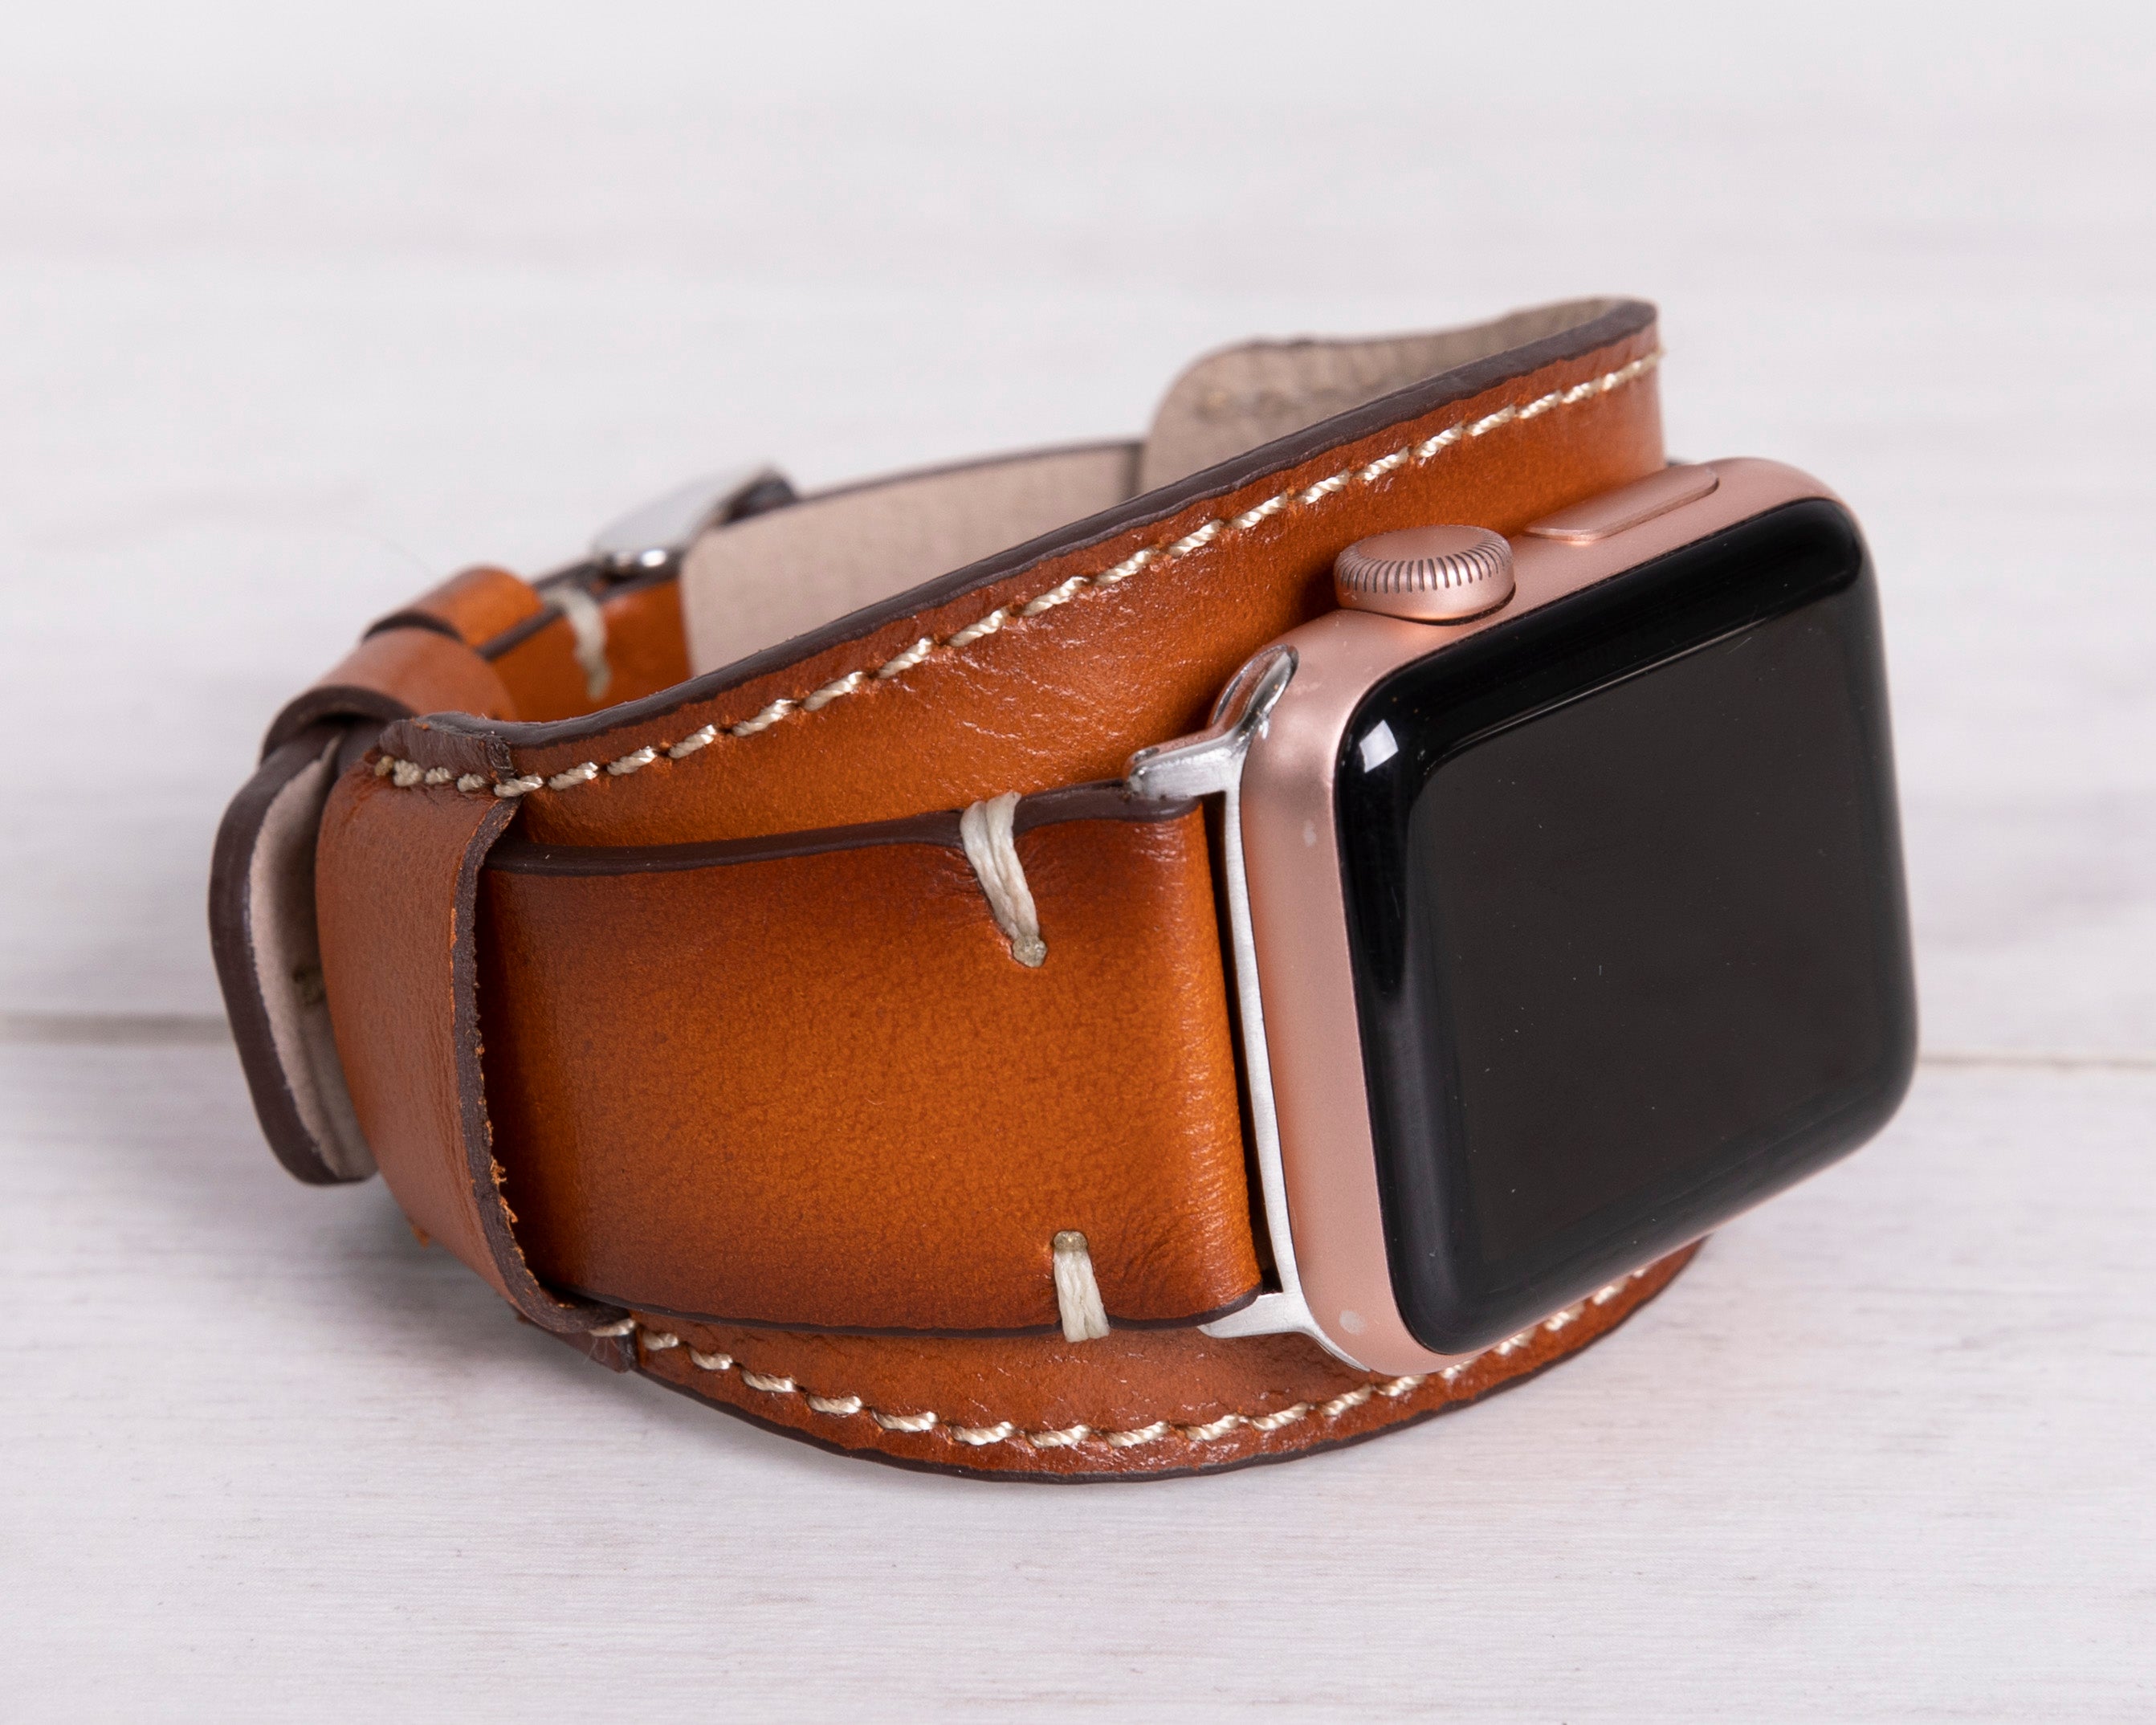 Buy For Apple Watch Strap,CHEEDAY Cuff Band Genuine Leather Strap iWatch  Band Bracelet Replacement Wristband with Stainless Steel Adapter Metal  Clasp for Apple Watch 42mm Series 1 Series 2 Series 3 (Brown